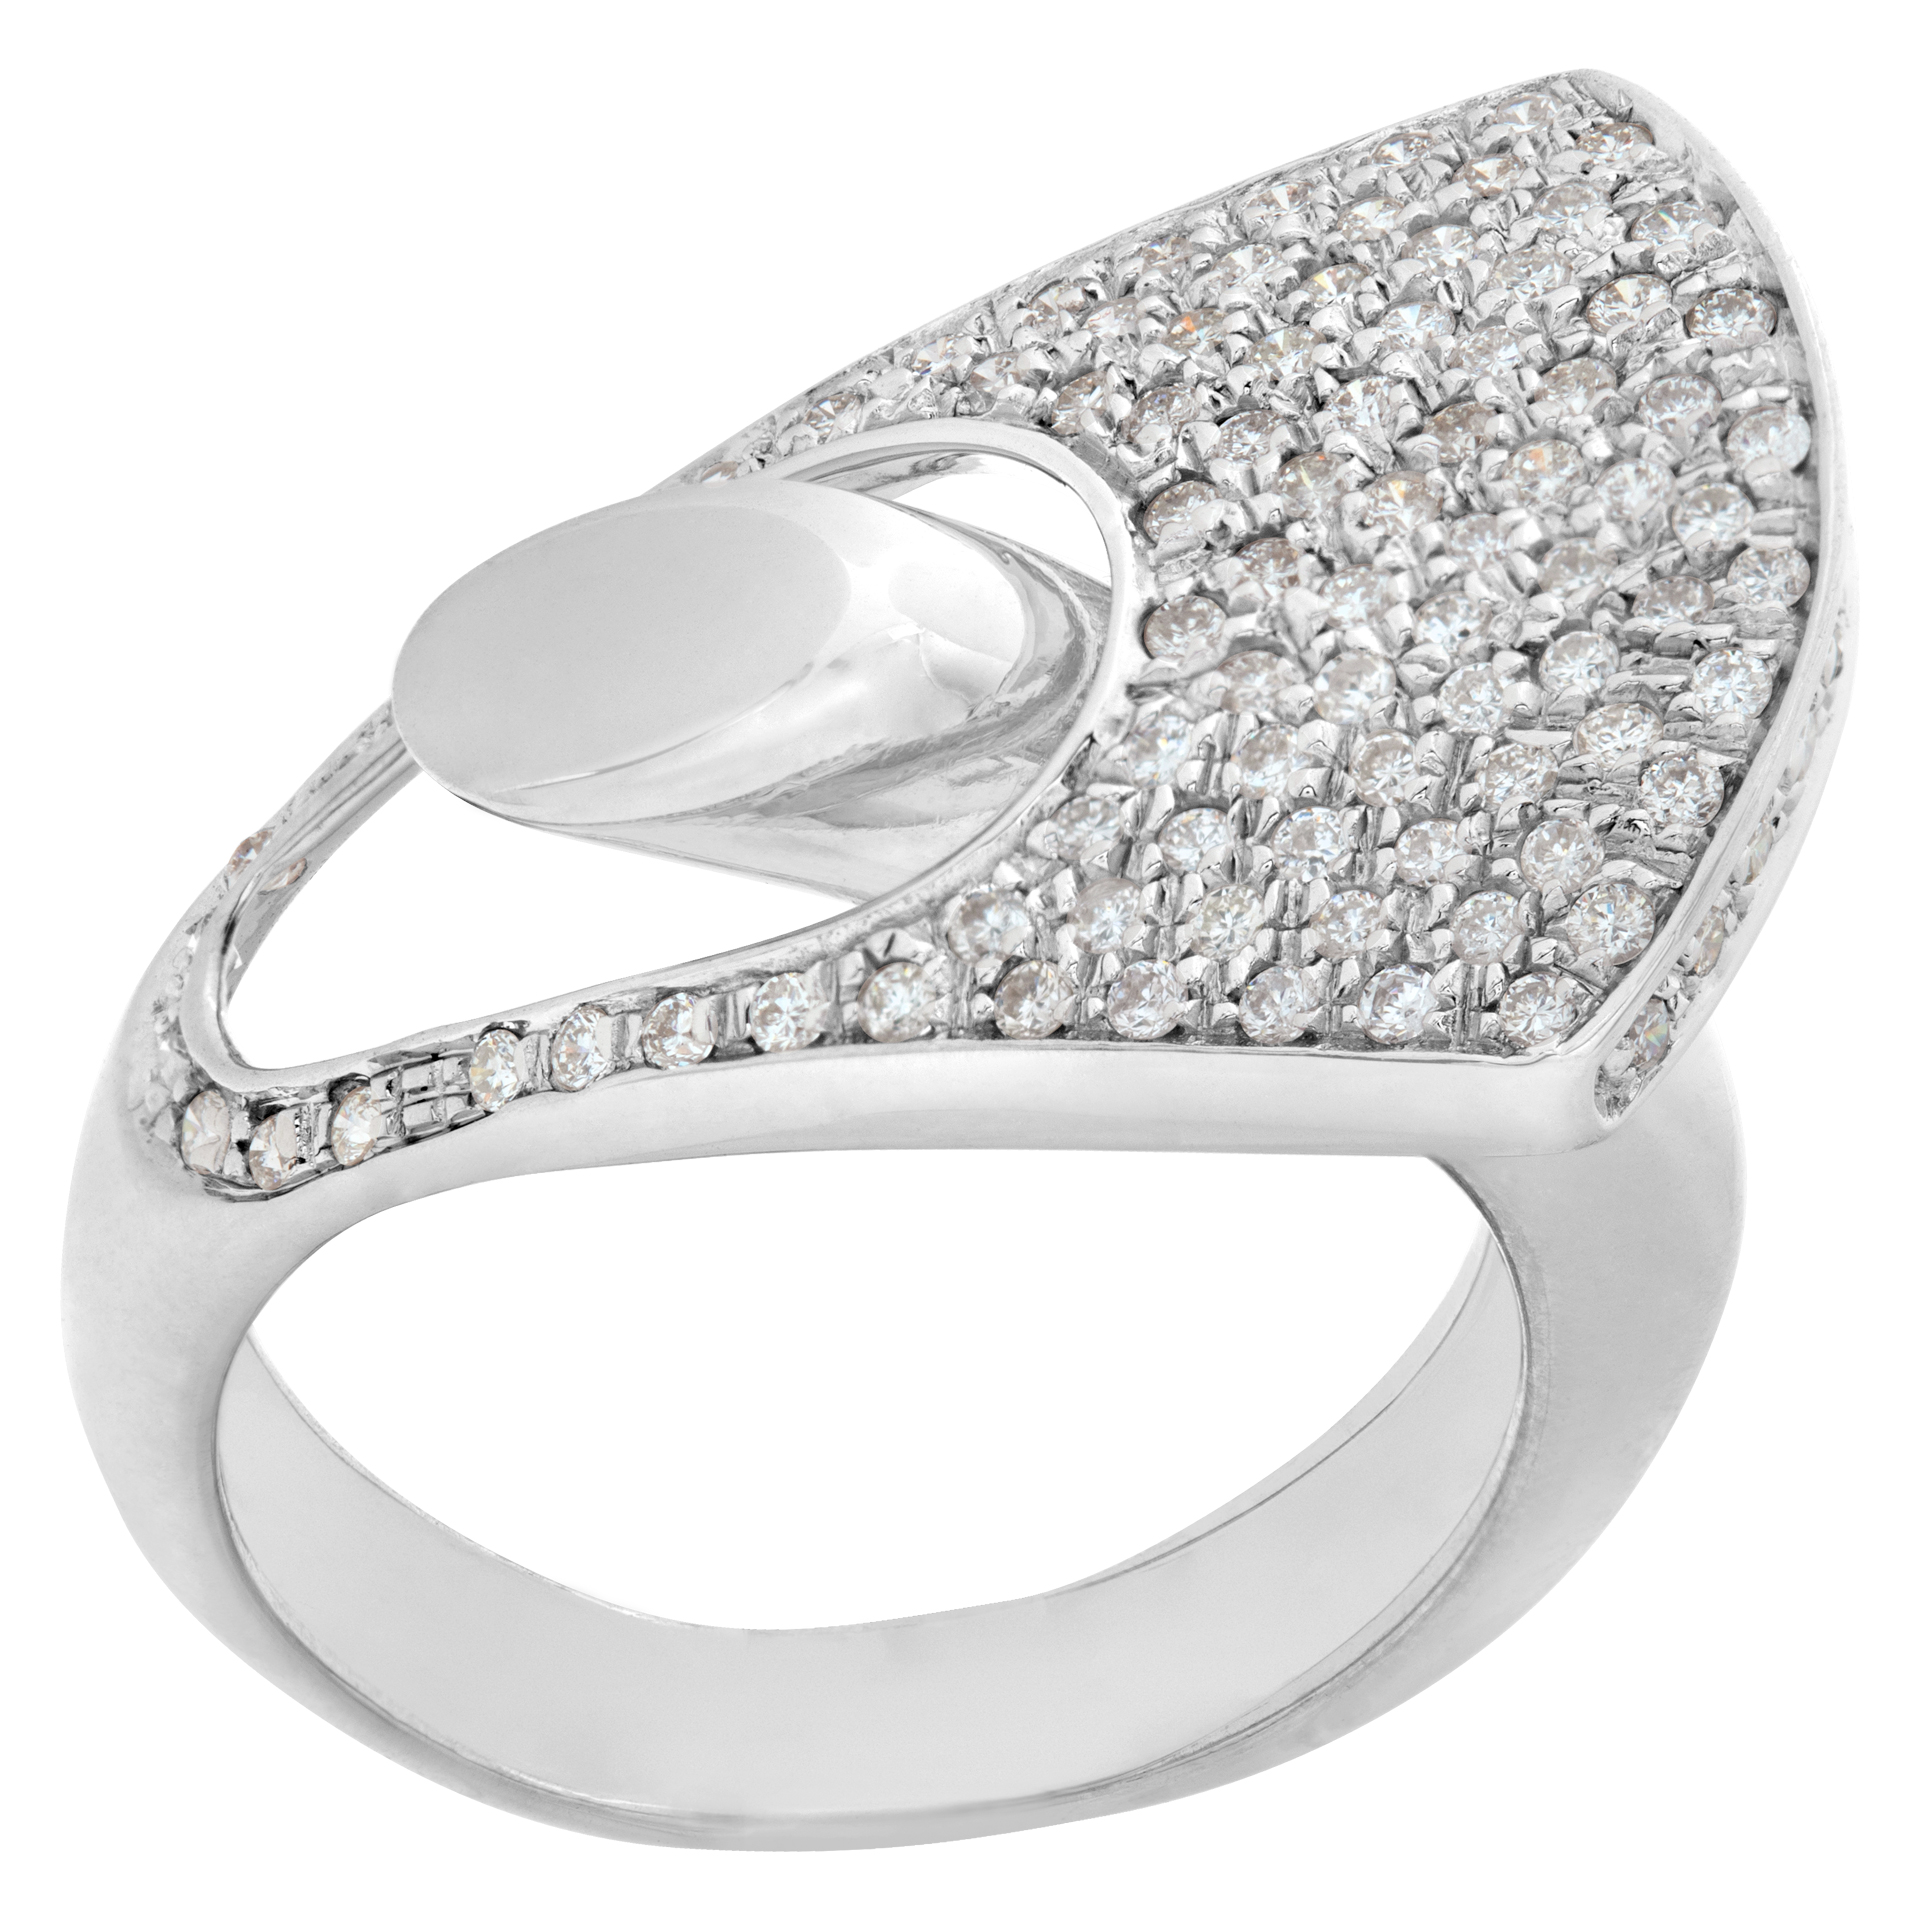 Pave diamond bypass ring in 18k white gold with over 1 carats in pave set round brilliant cut diamonds image 1